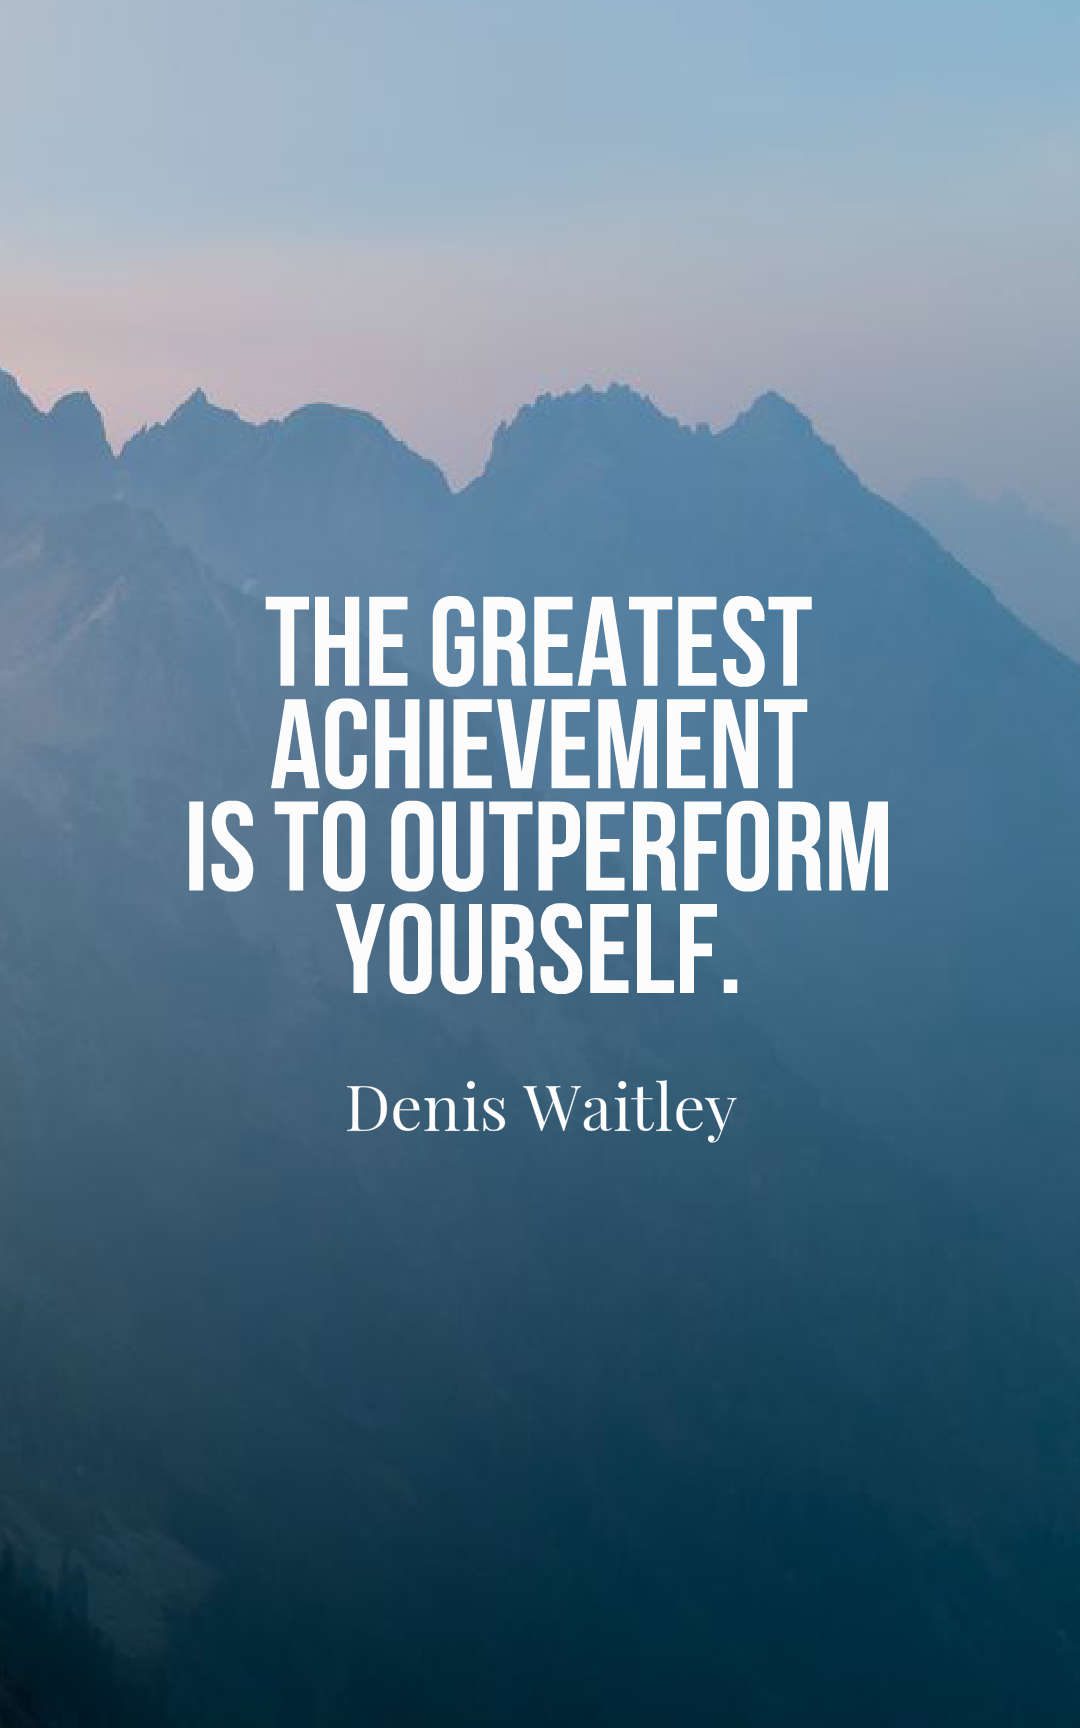 52 Inspirational Achievement Quotes And Sayings